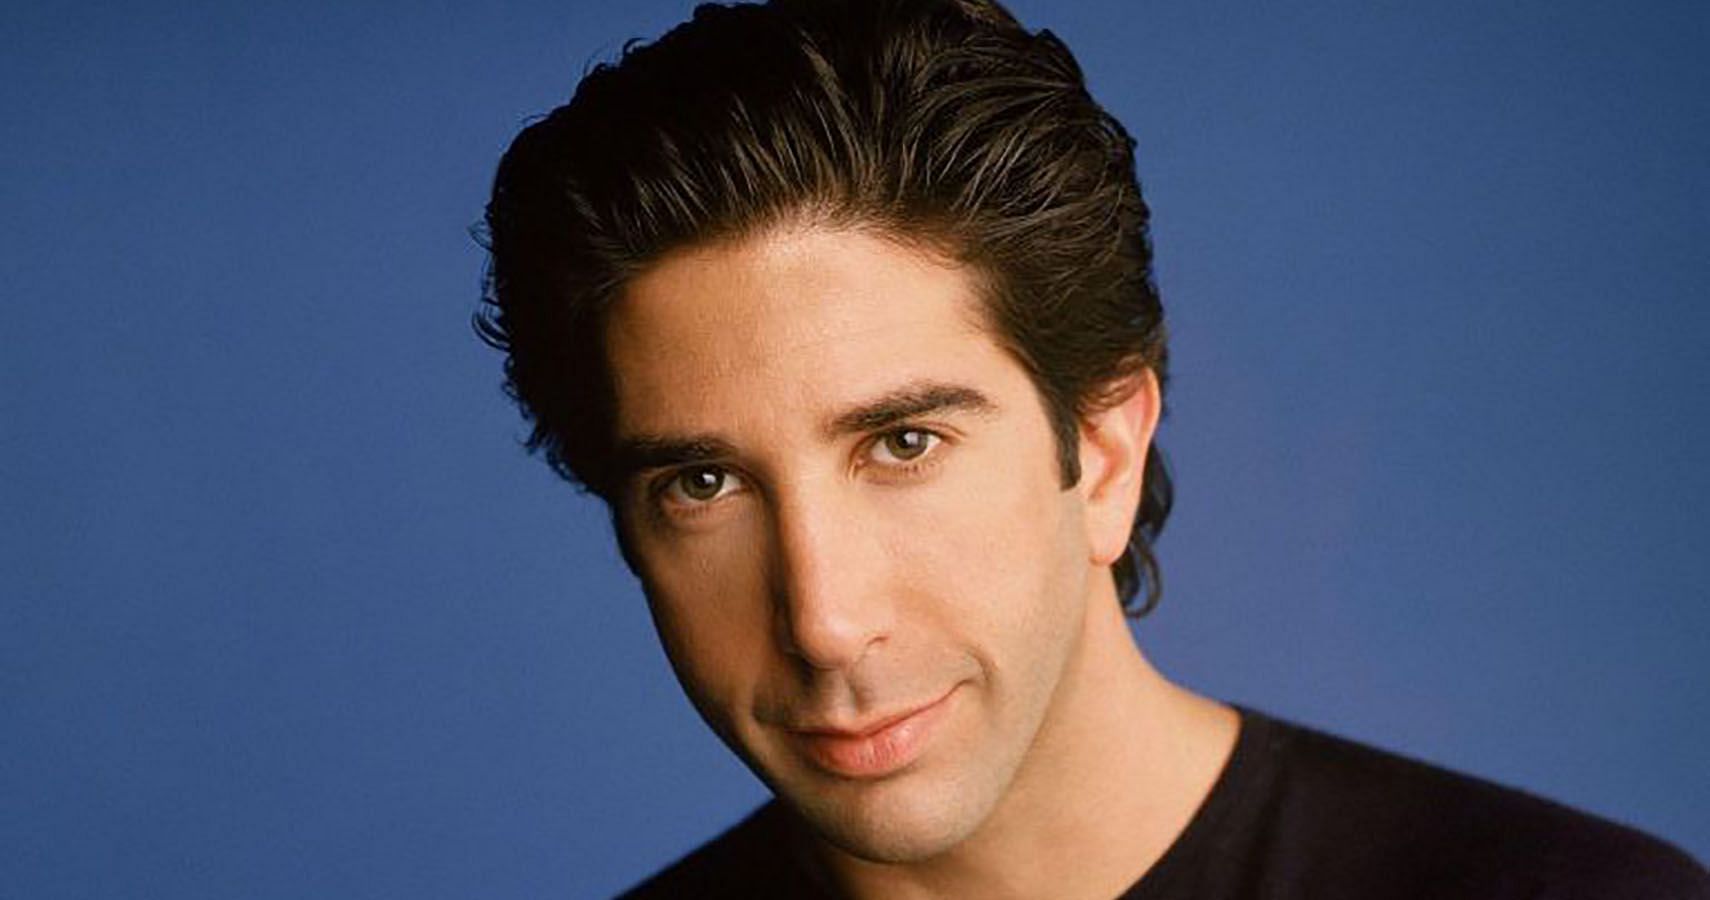 David Schwimmer played Ross Geller in Friends (Image via TheThings)